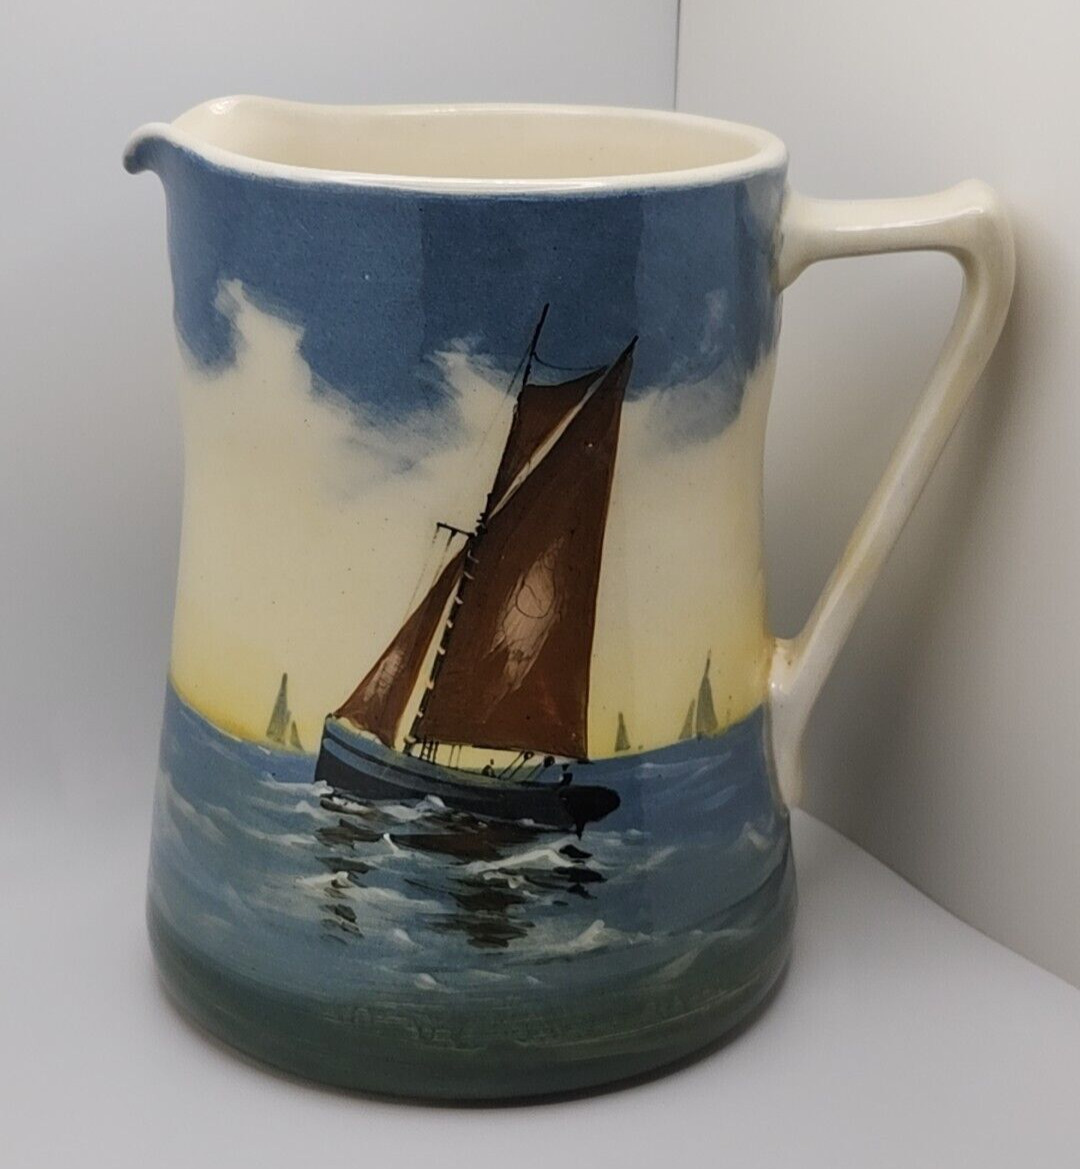 Royal Doulton Hand Painted Ocean Sailing Ship Pitcher Vintage Glossy Finish